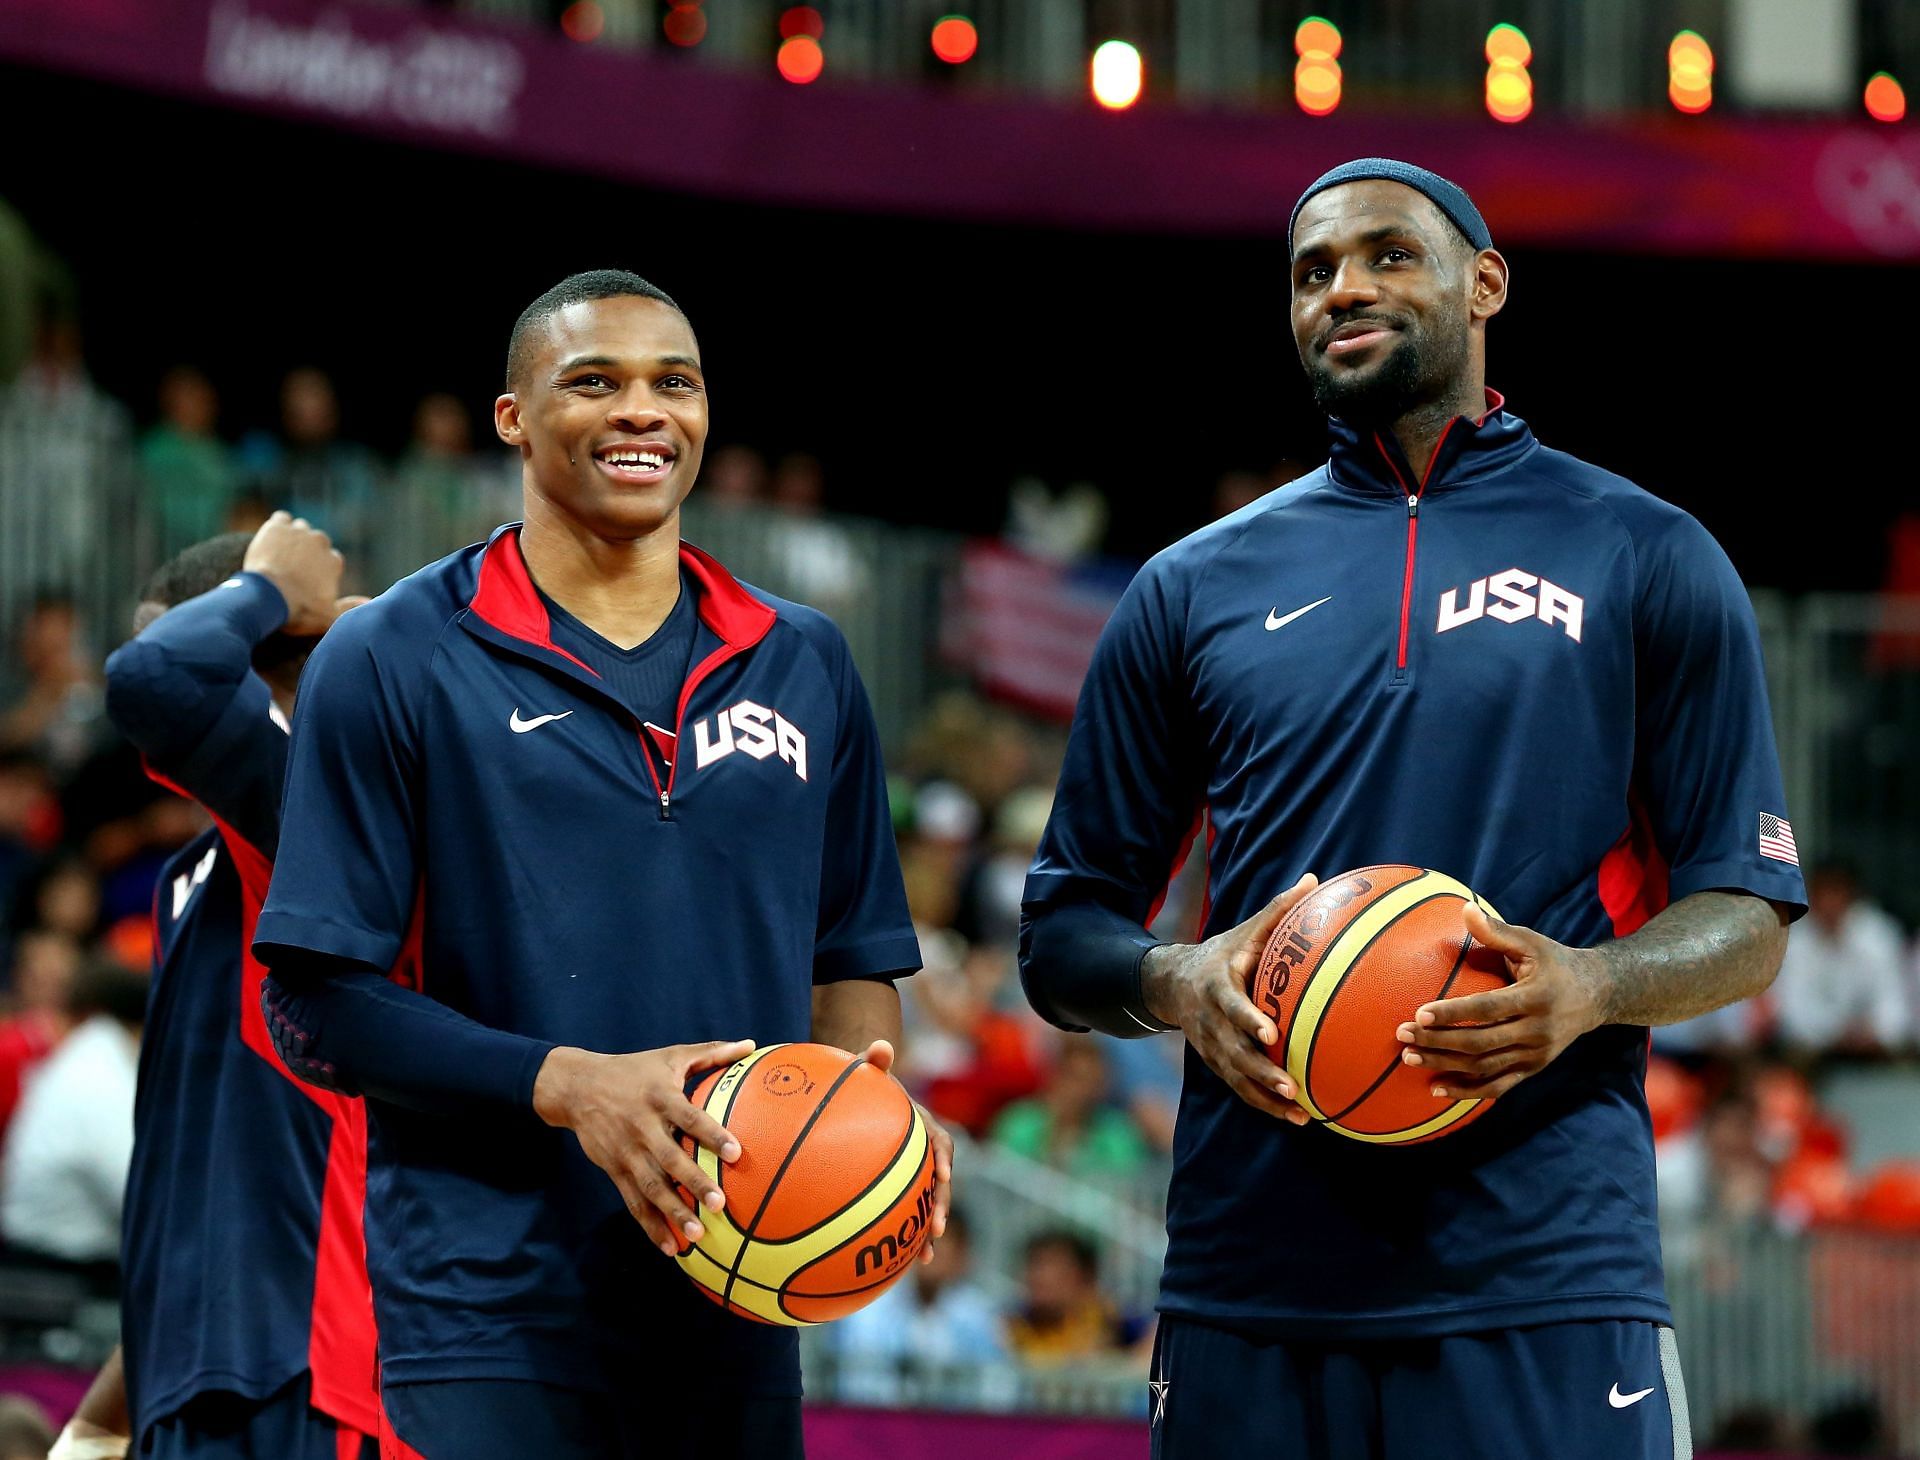 Russell Westbrook and LeBron James during the 2012 Olympics